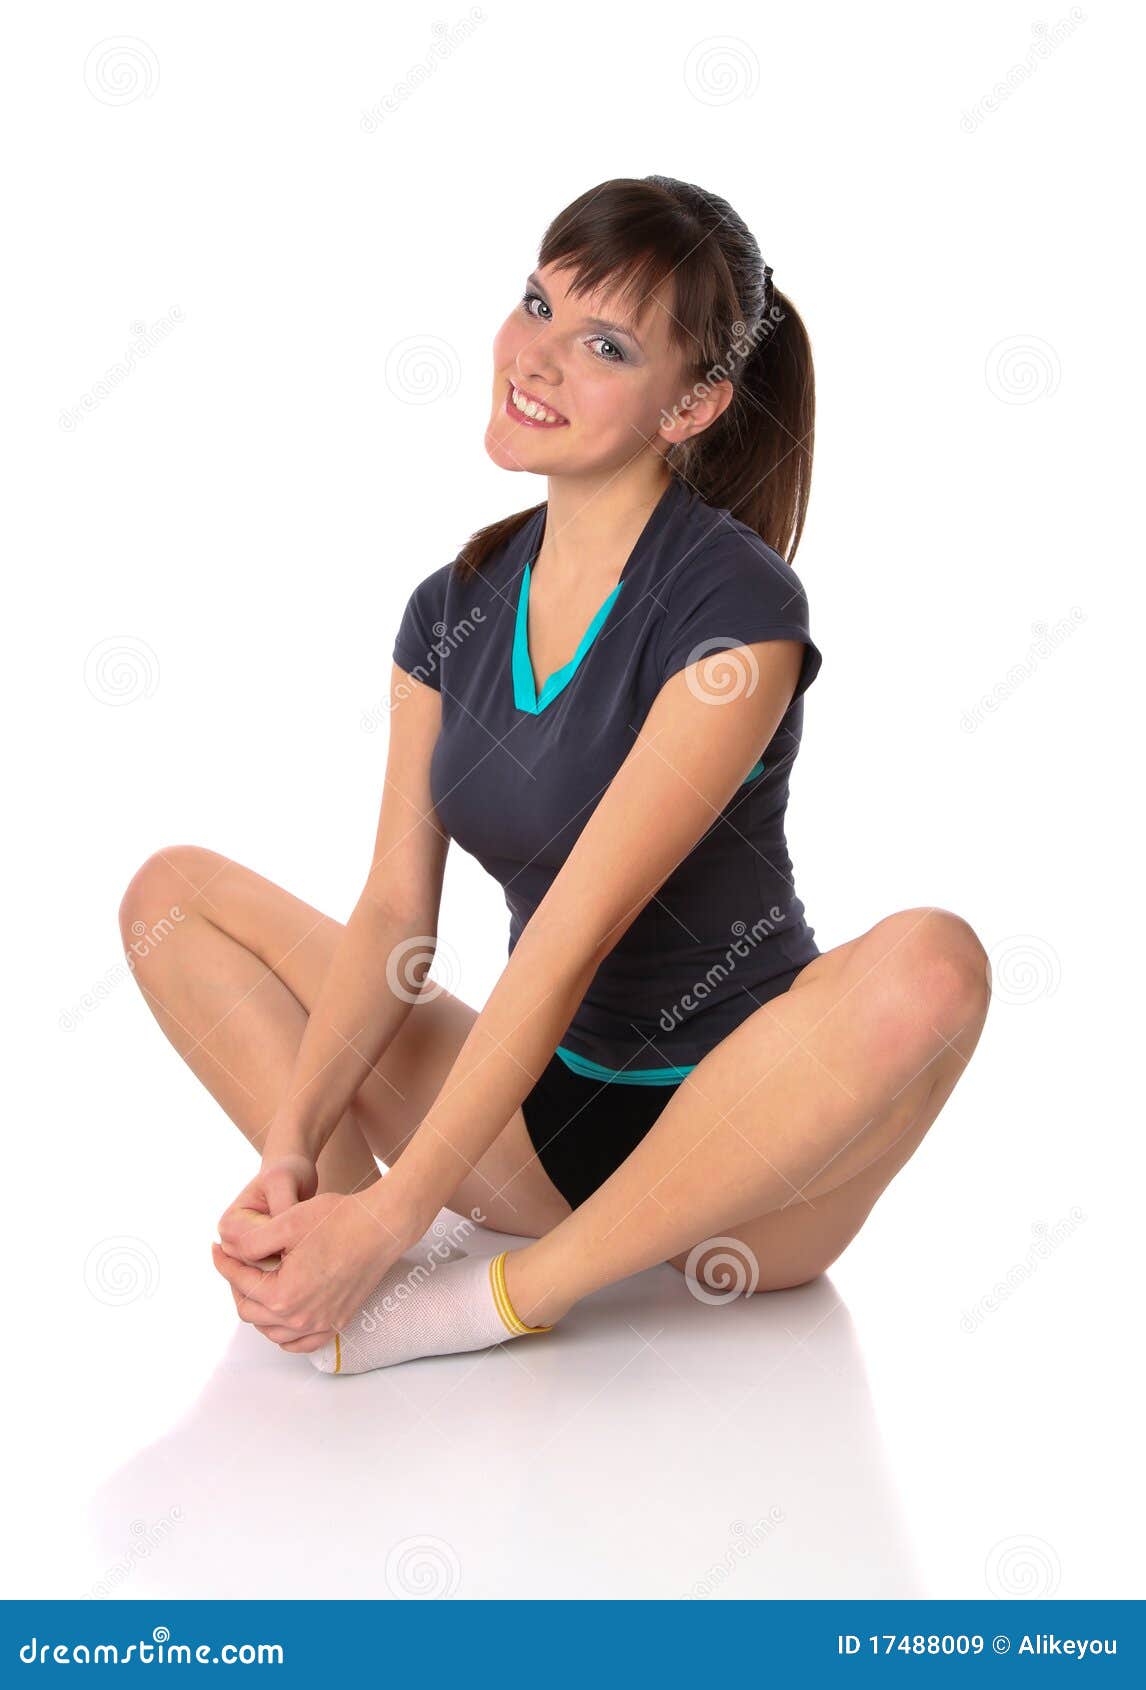 Teenage Girl In Gymnastics Poses Royalty Free Stock Images